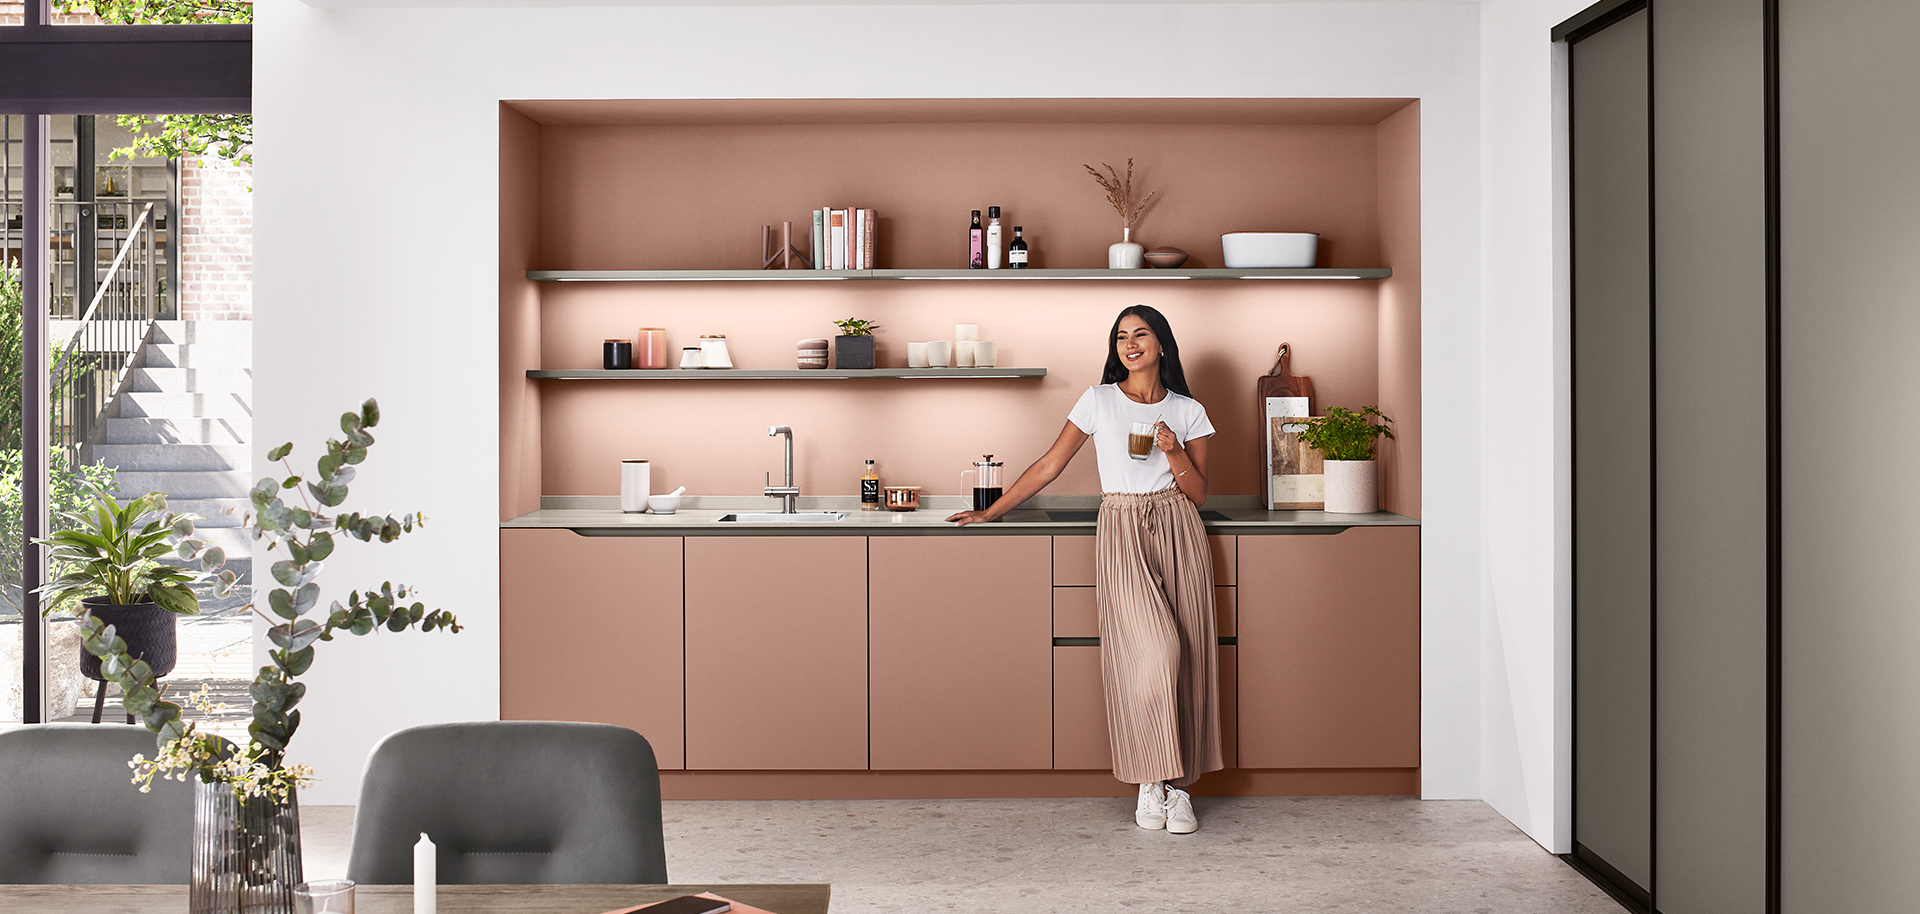 Modern kitchen design with a person standing by the counter, featuring elegant dusk rose cabinetry, sleek appliances, and open shelving with minimalist decor.